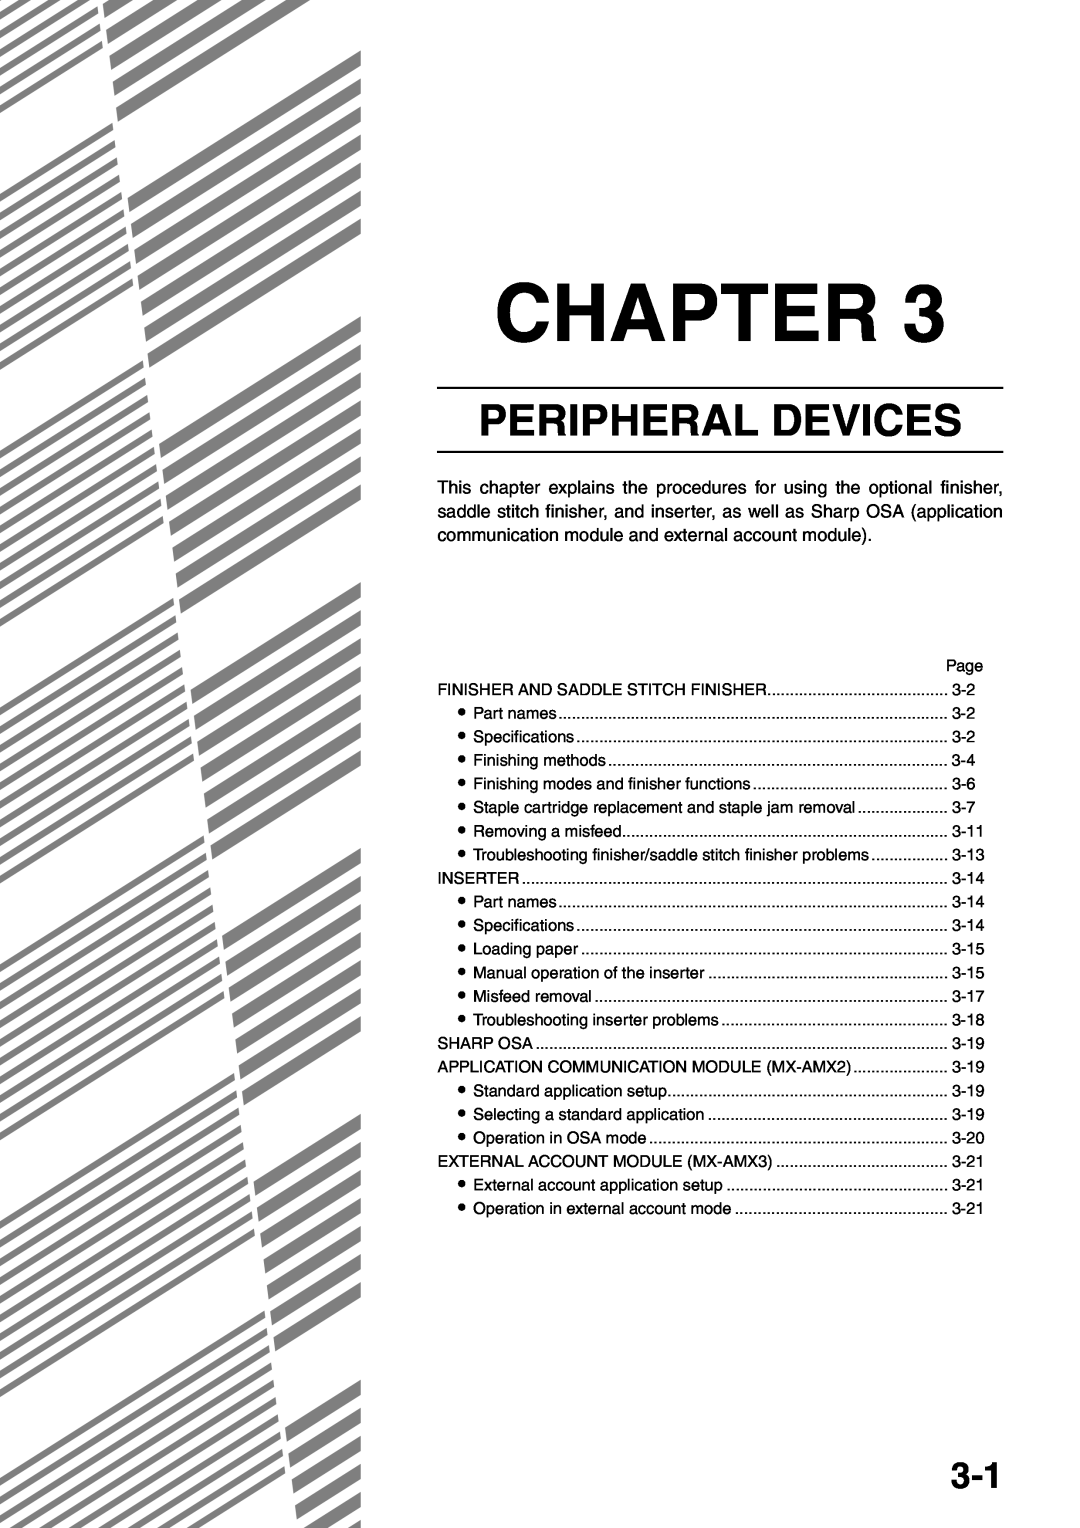 Sharp MX-M620U, MX-M700N, MX-M550U, MX-M620N, MX-M700U, MX-M550N specifications Peripheral Devices, Chapter 